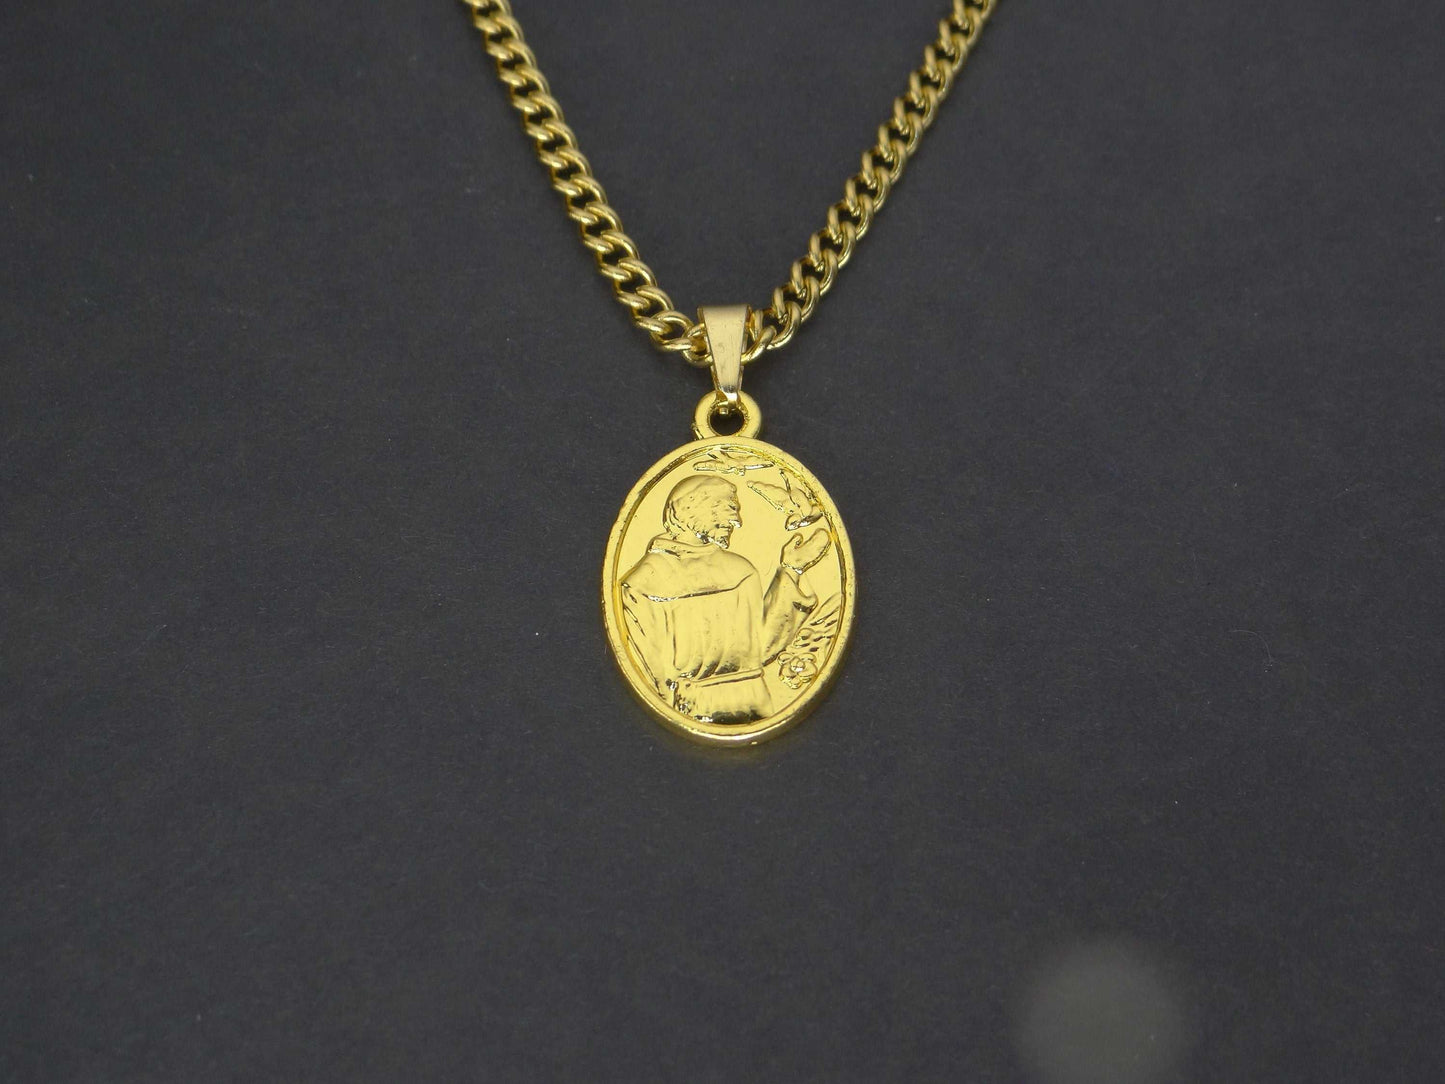 CRW Saint Francis of Assissi Necklace with 1.8mm curb link chain in gold - Necklace for Women - Necklace for Men - Necklace with Pendant